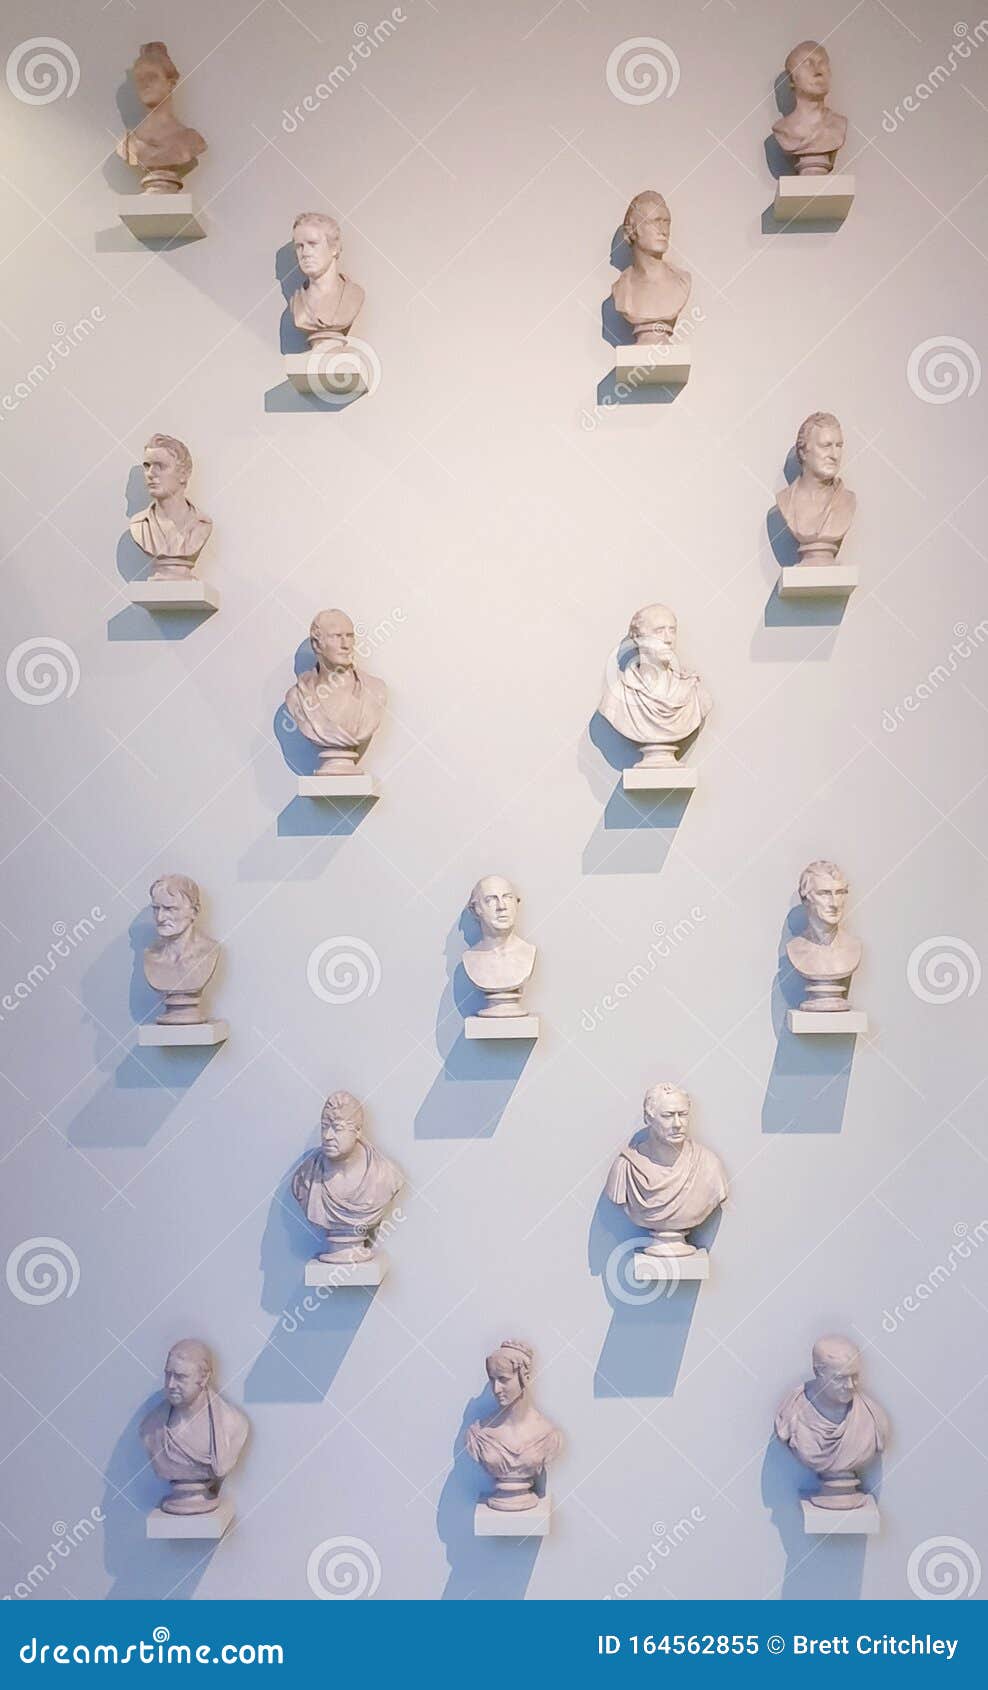 busts sculptures hanging on wall abstract